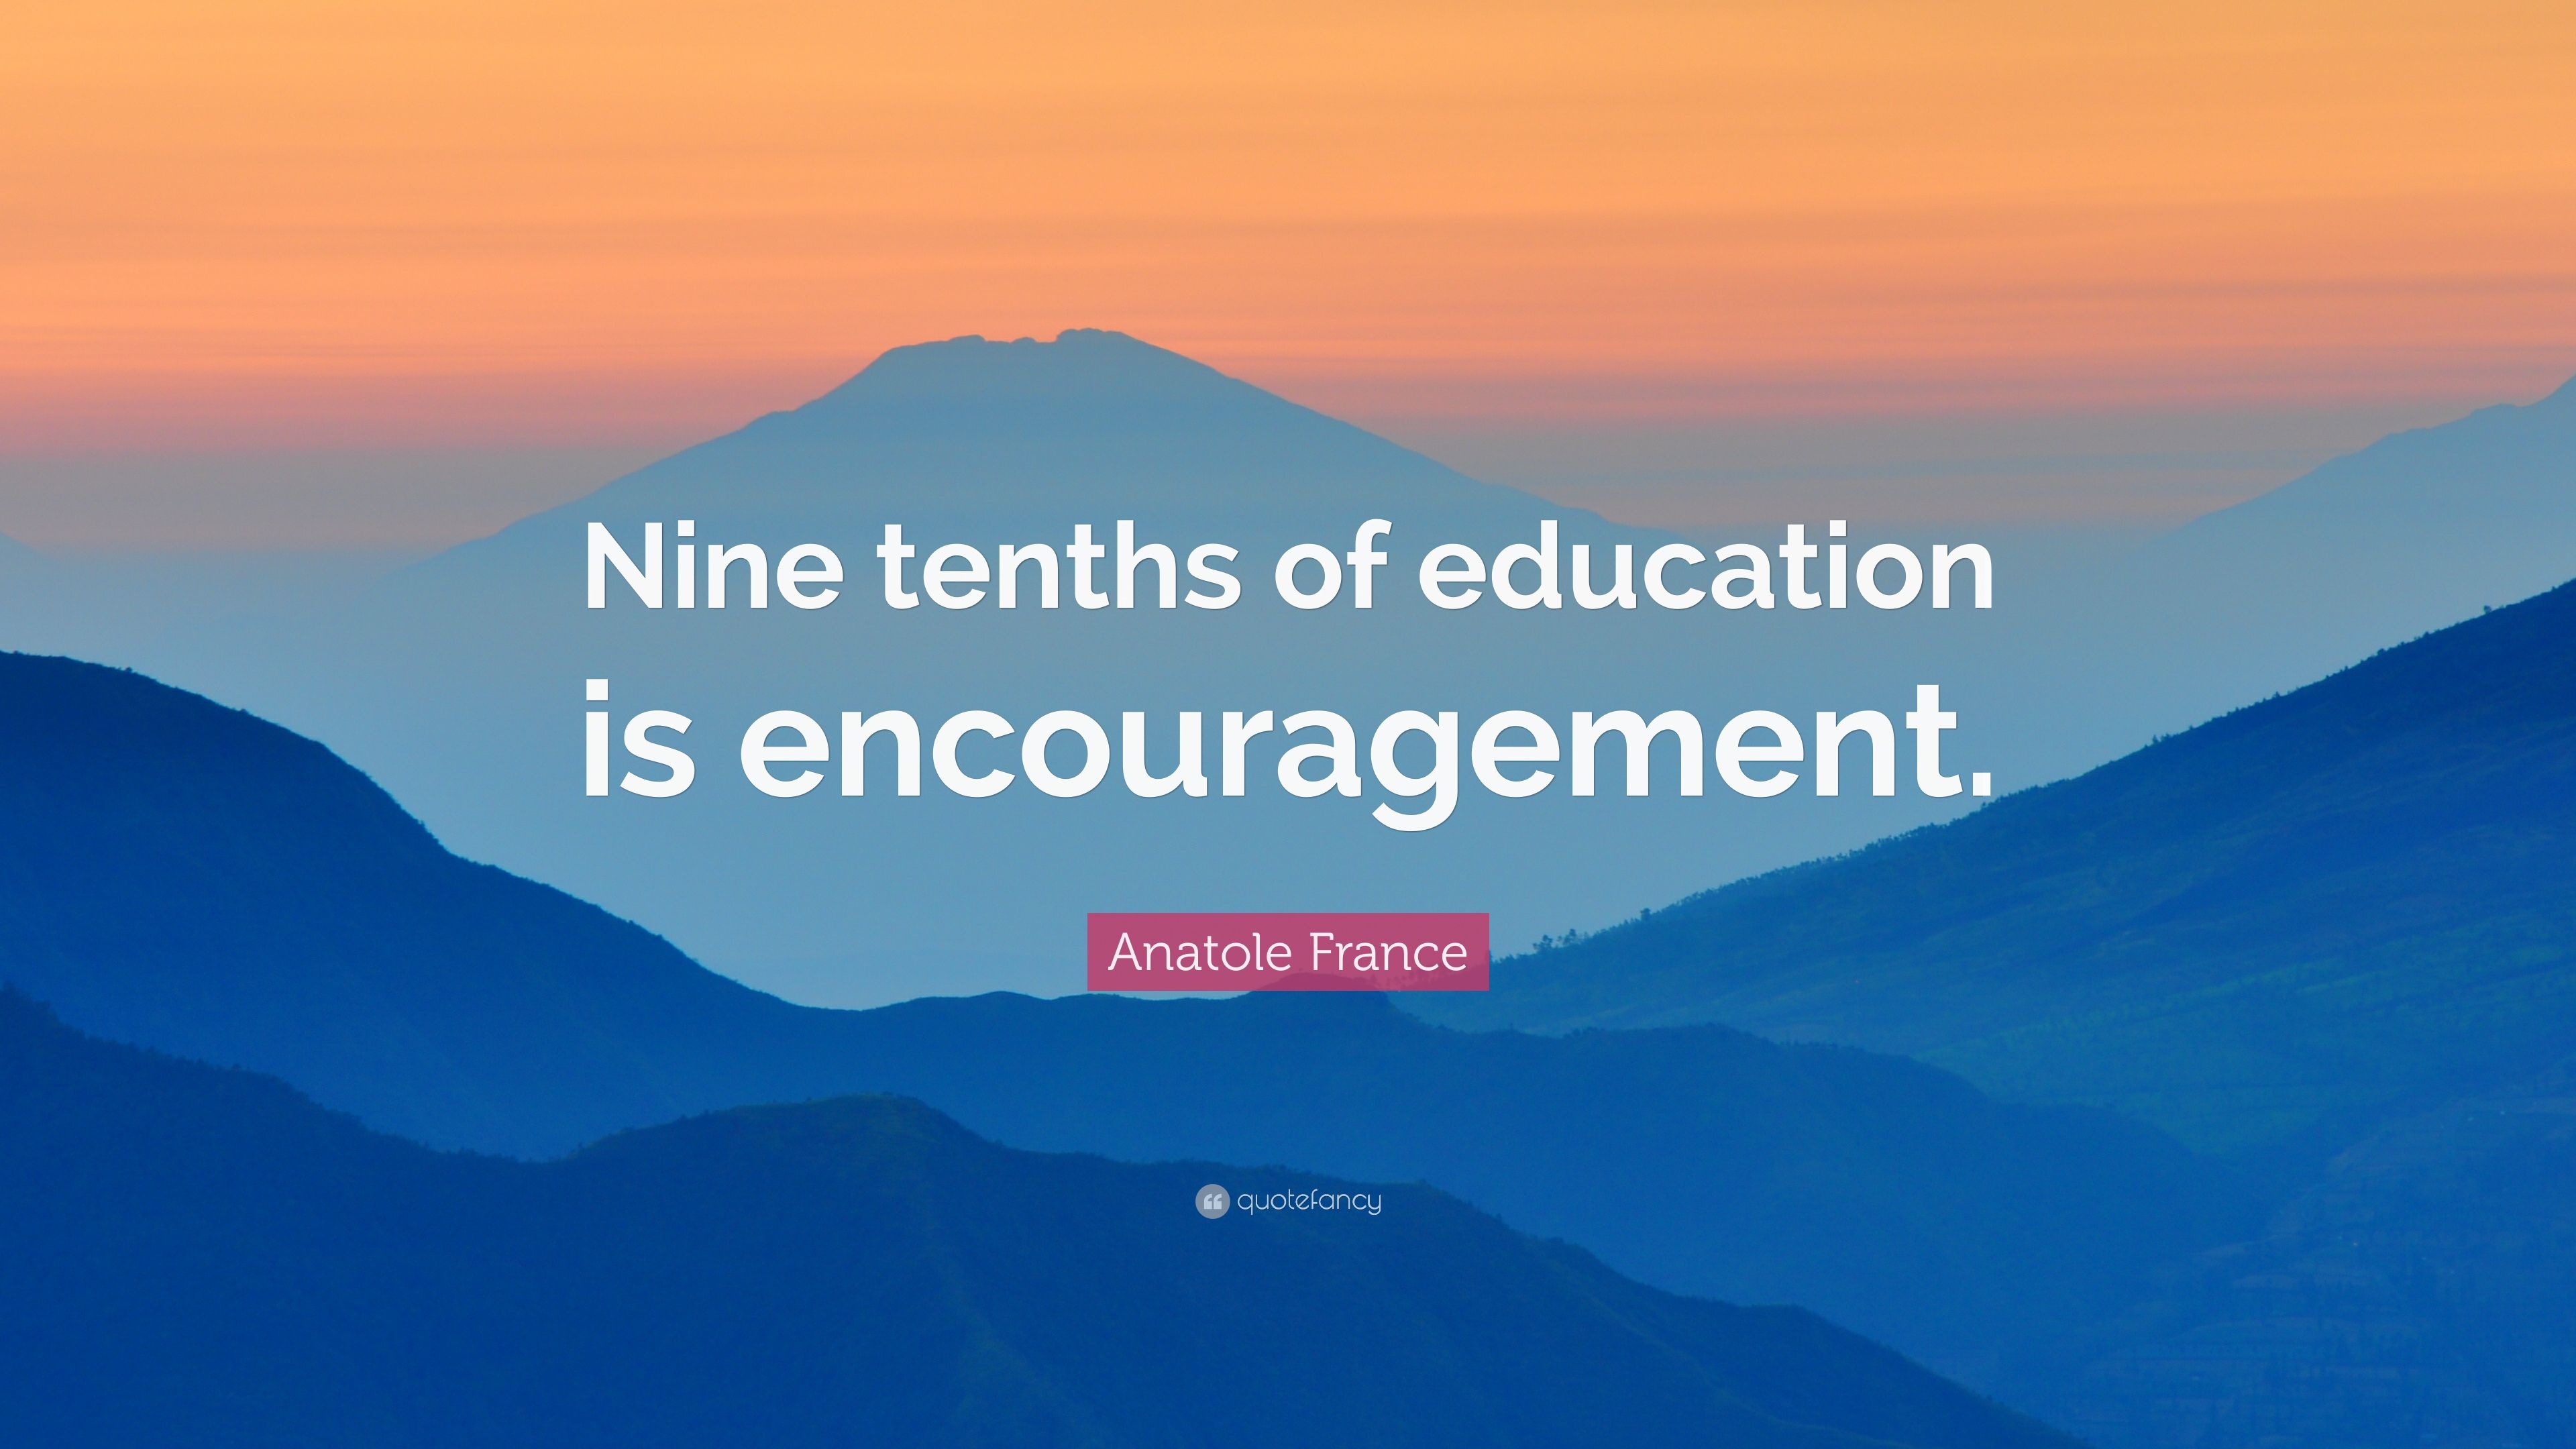 Anatole France Quote: “Nine tenths of education is encouragement.” (9 wallpaper)